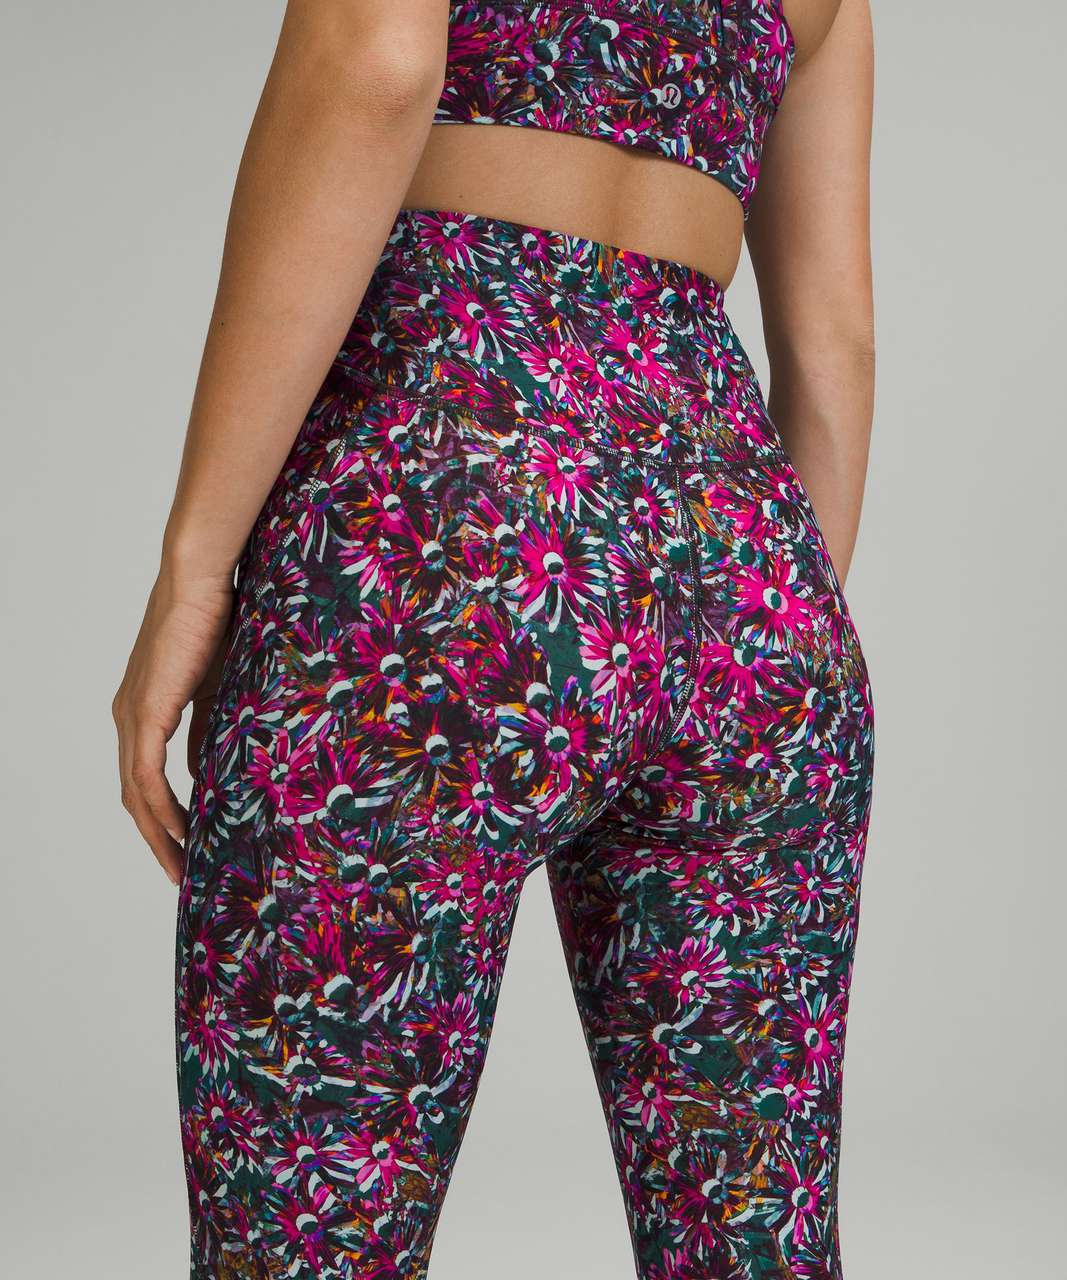 Lululemon Base Pace High-Rise Fleece Tight 28" - Floral Electric Multi